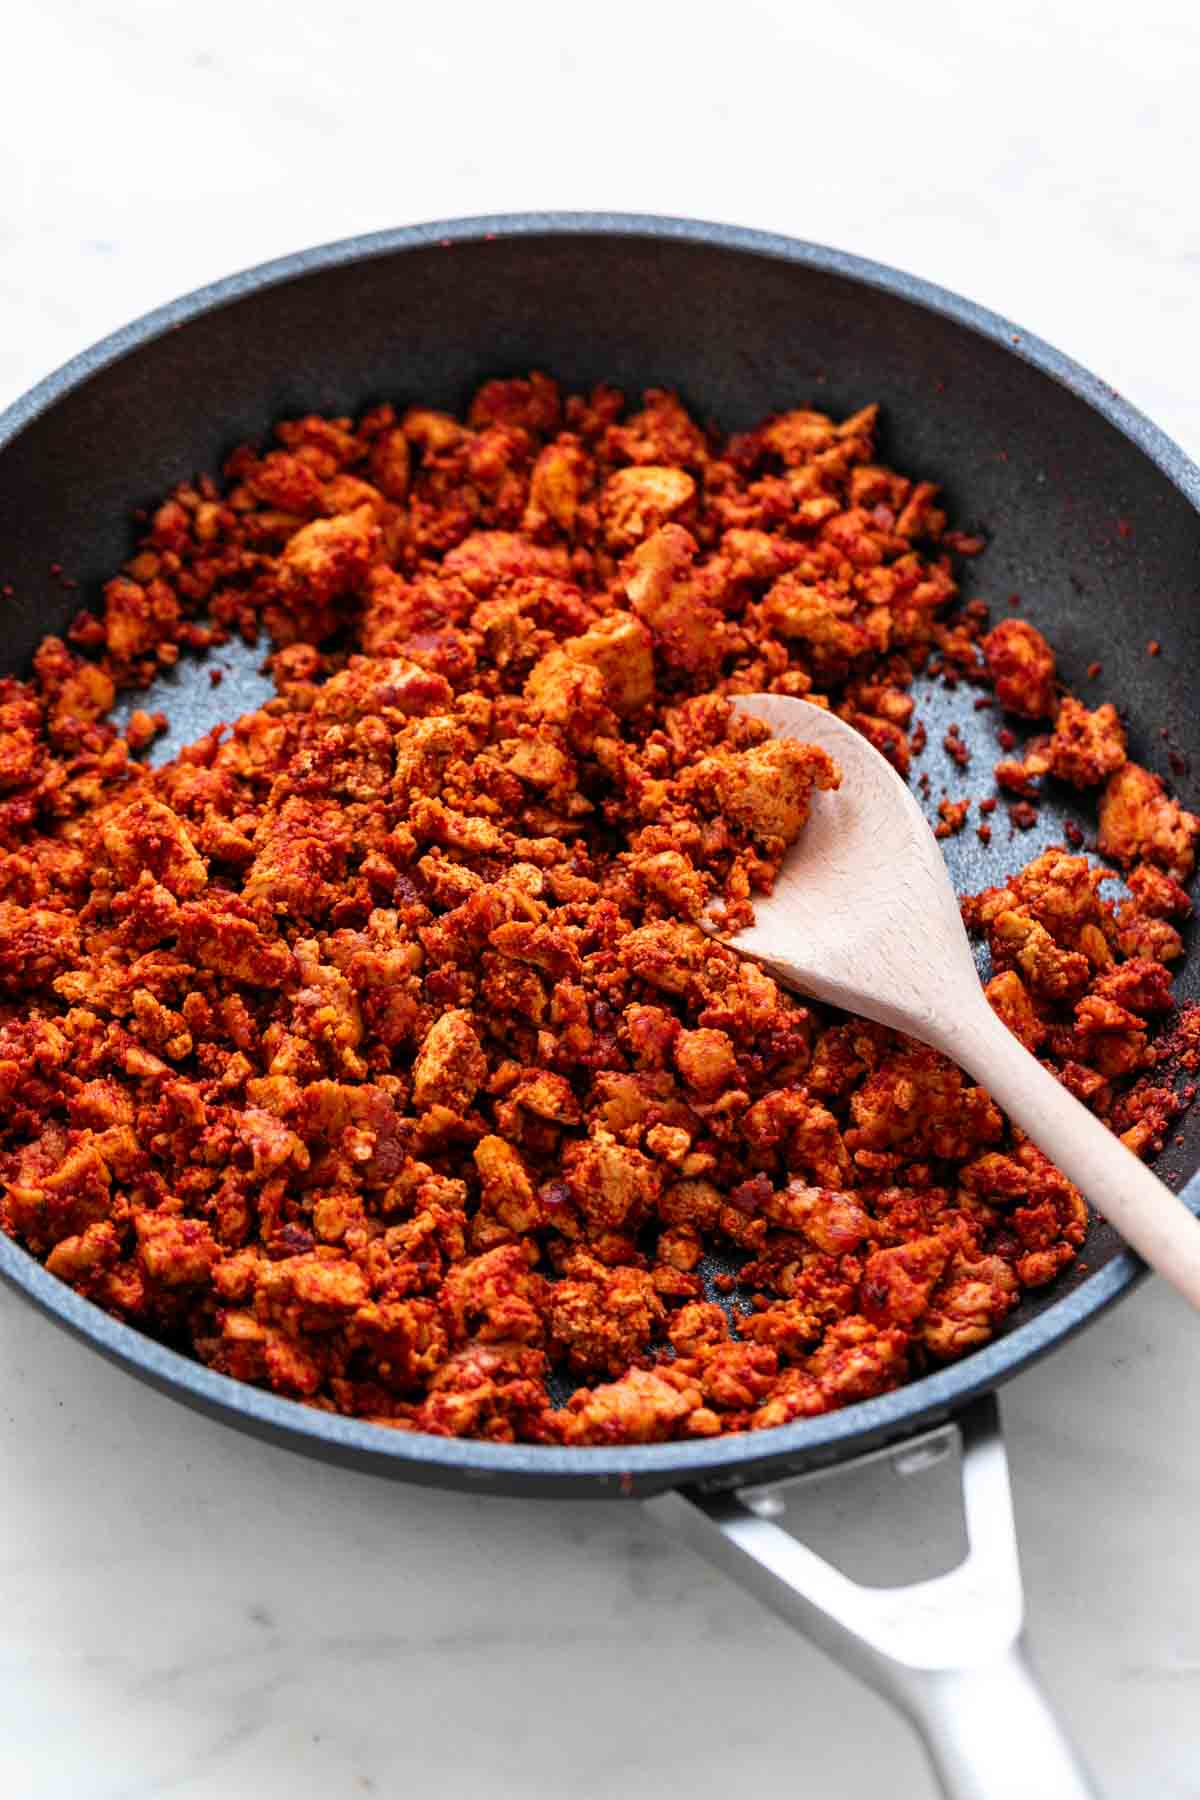 Skillet with vegan soy chorizo and a wooden spoon.